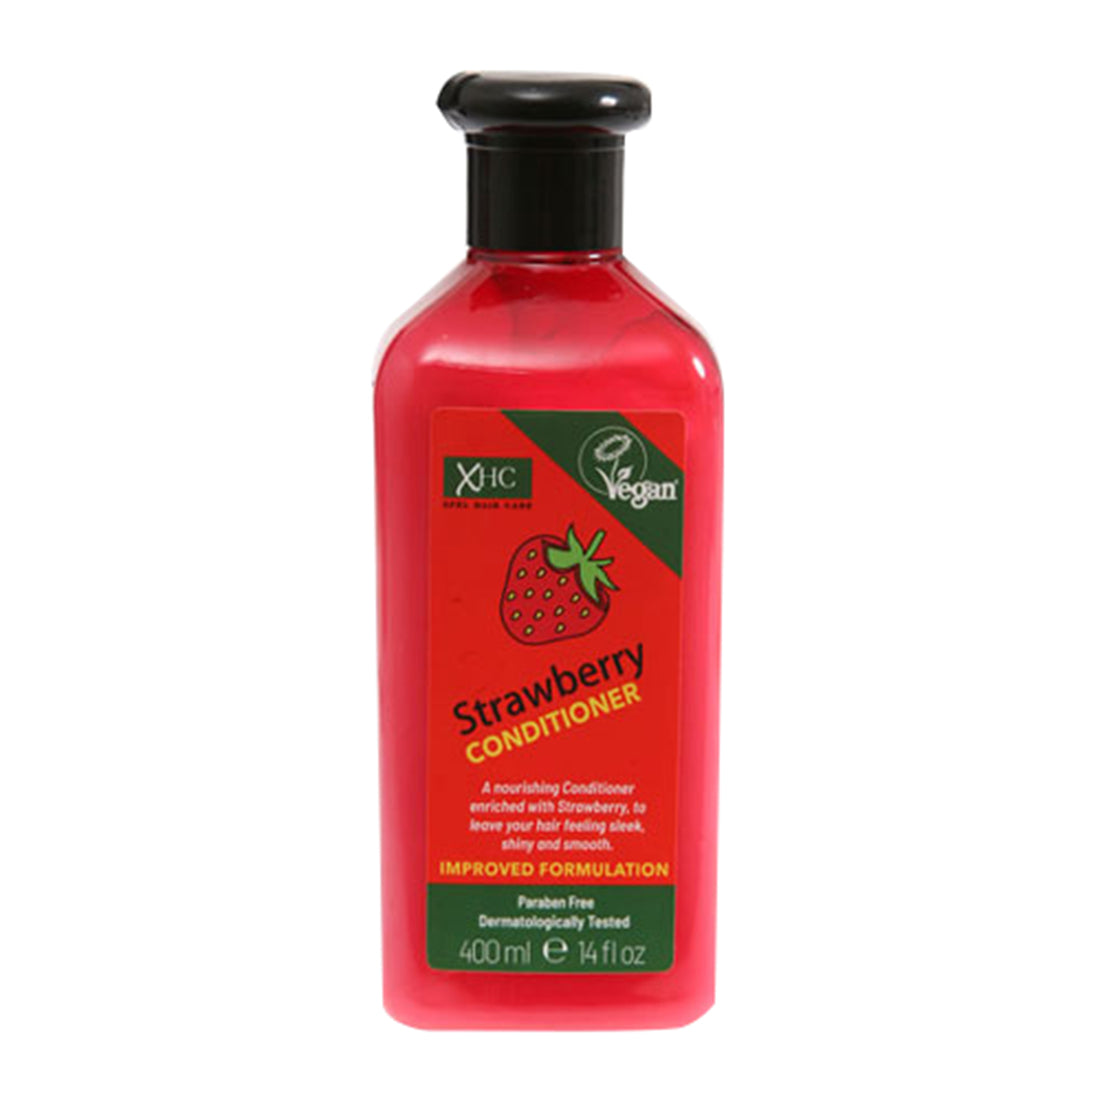 XHC Xpel Hair Care Strawberry Conditioner (400ml)